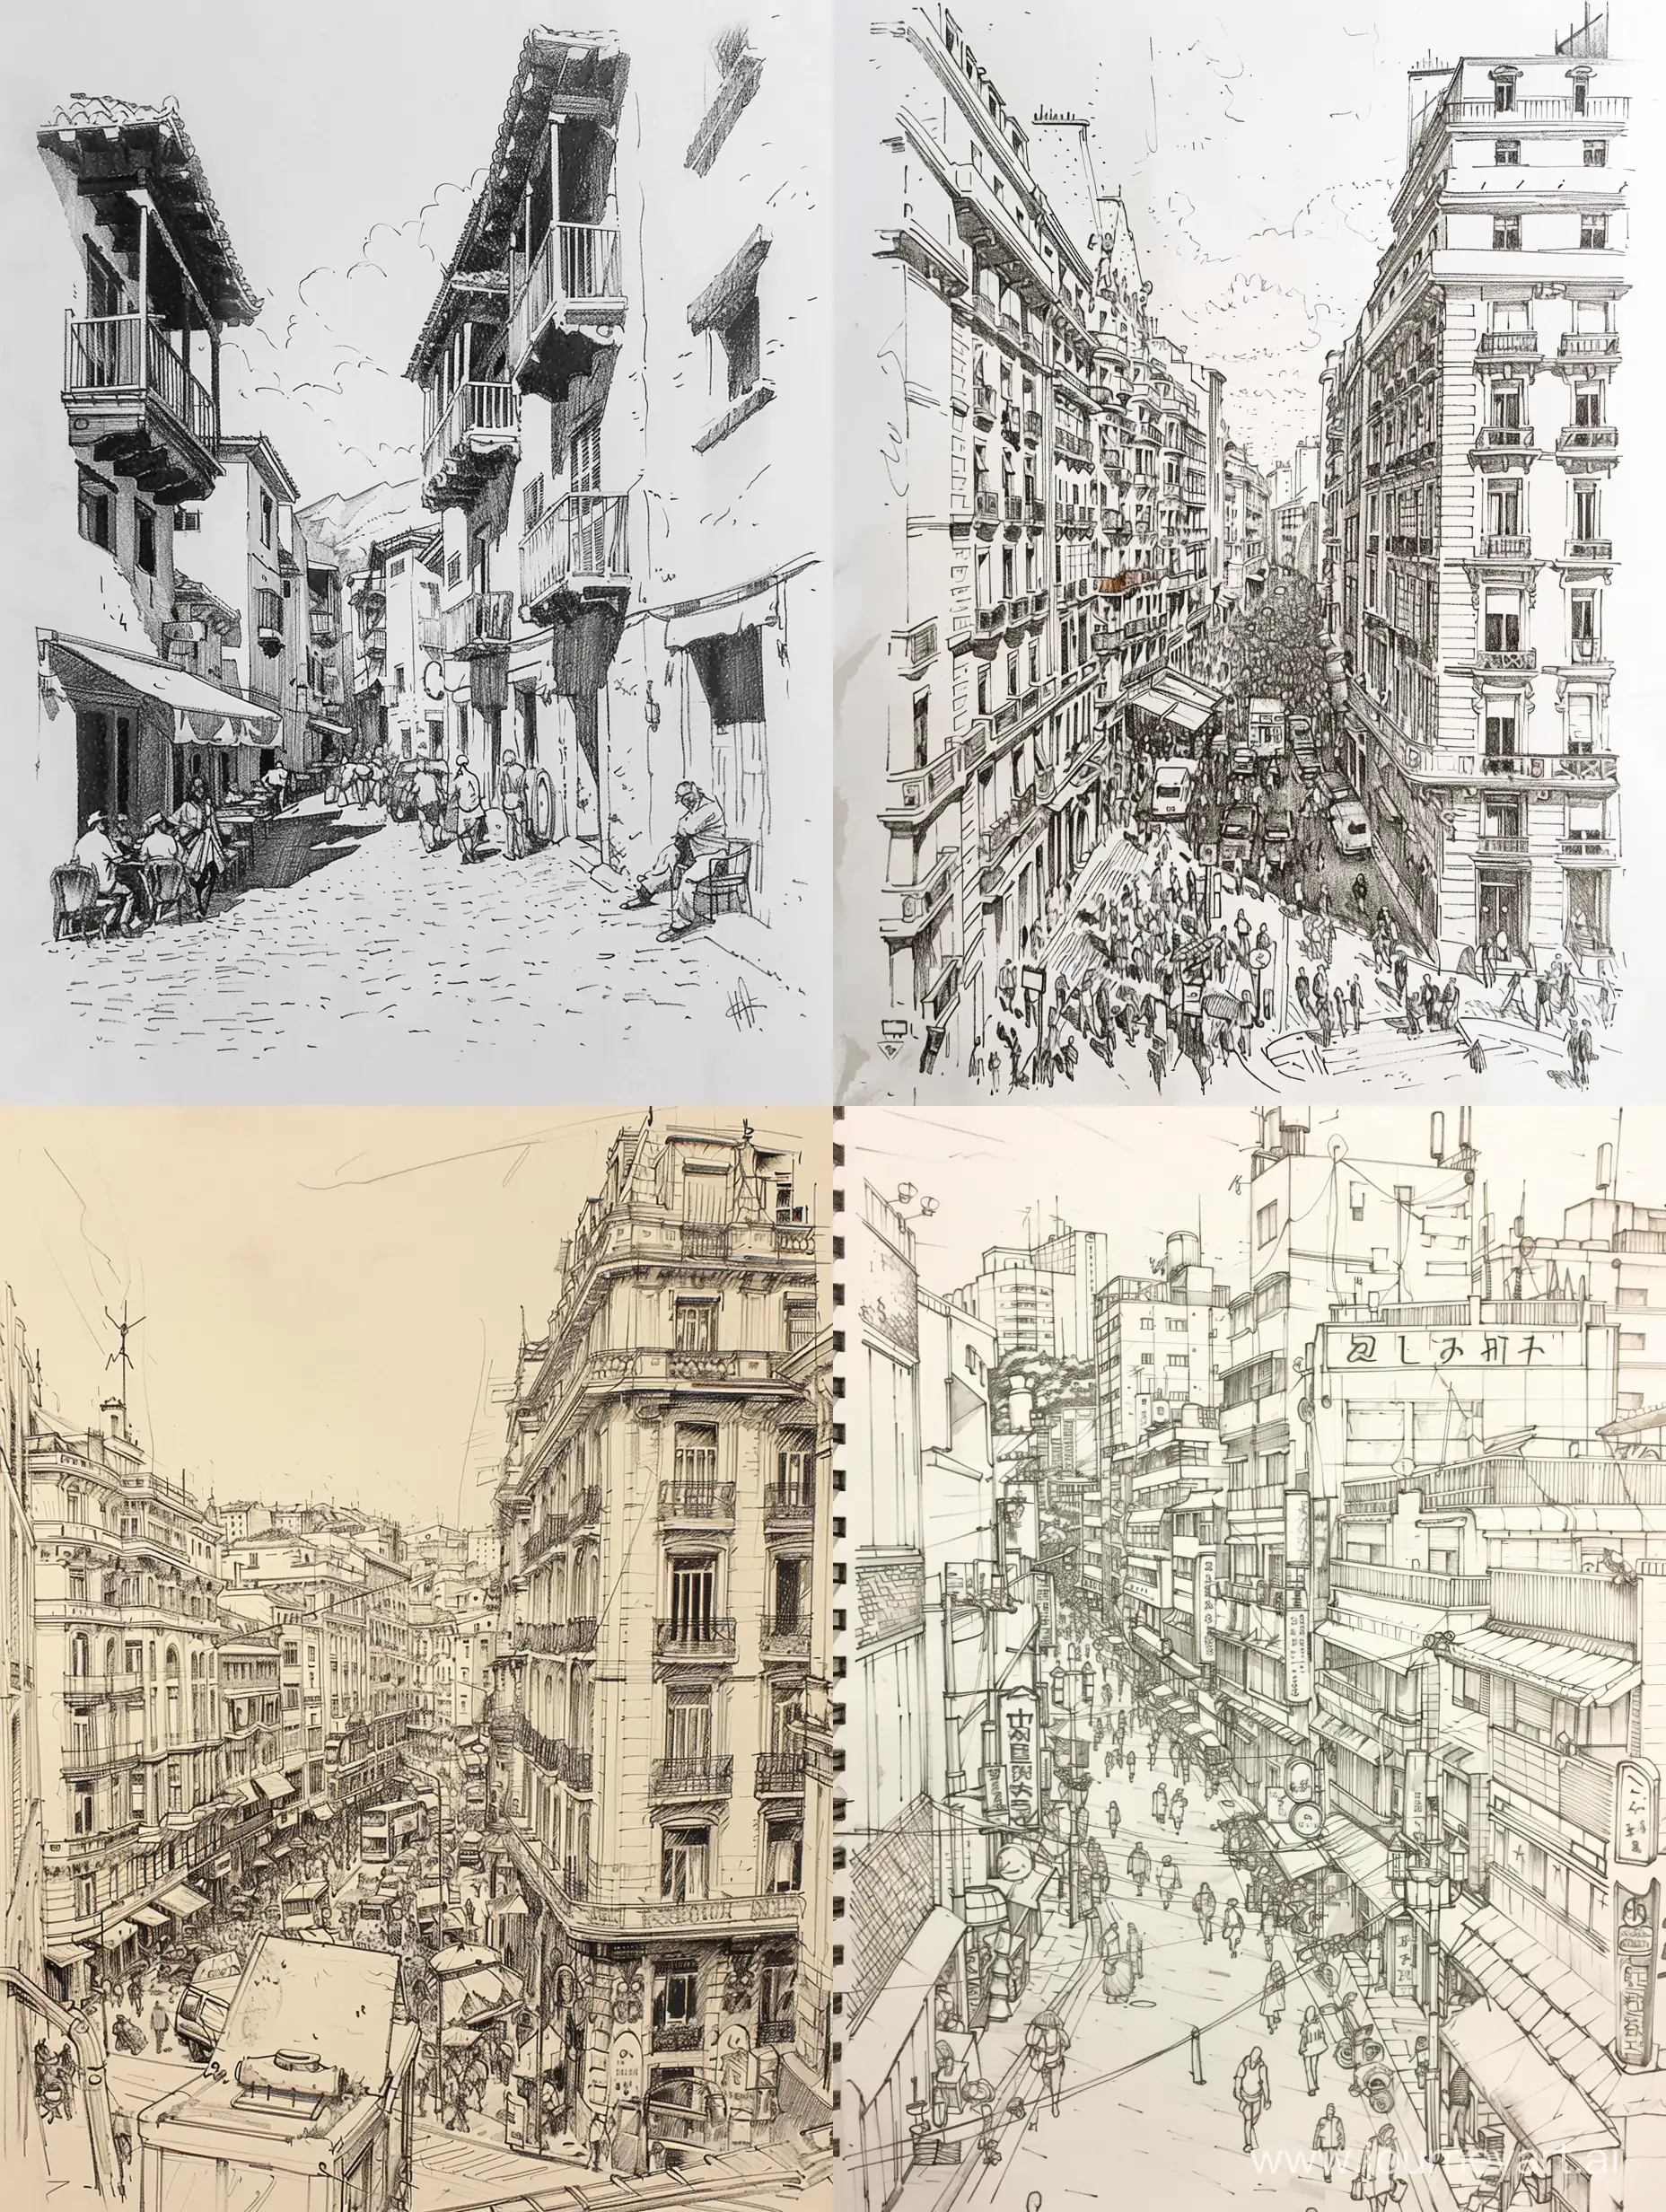 Drawing some buildings by the crowded street with rapid that fills the entire page and is easy to draw over